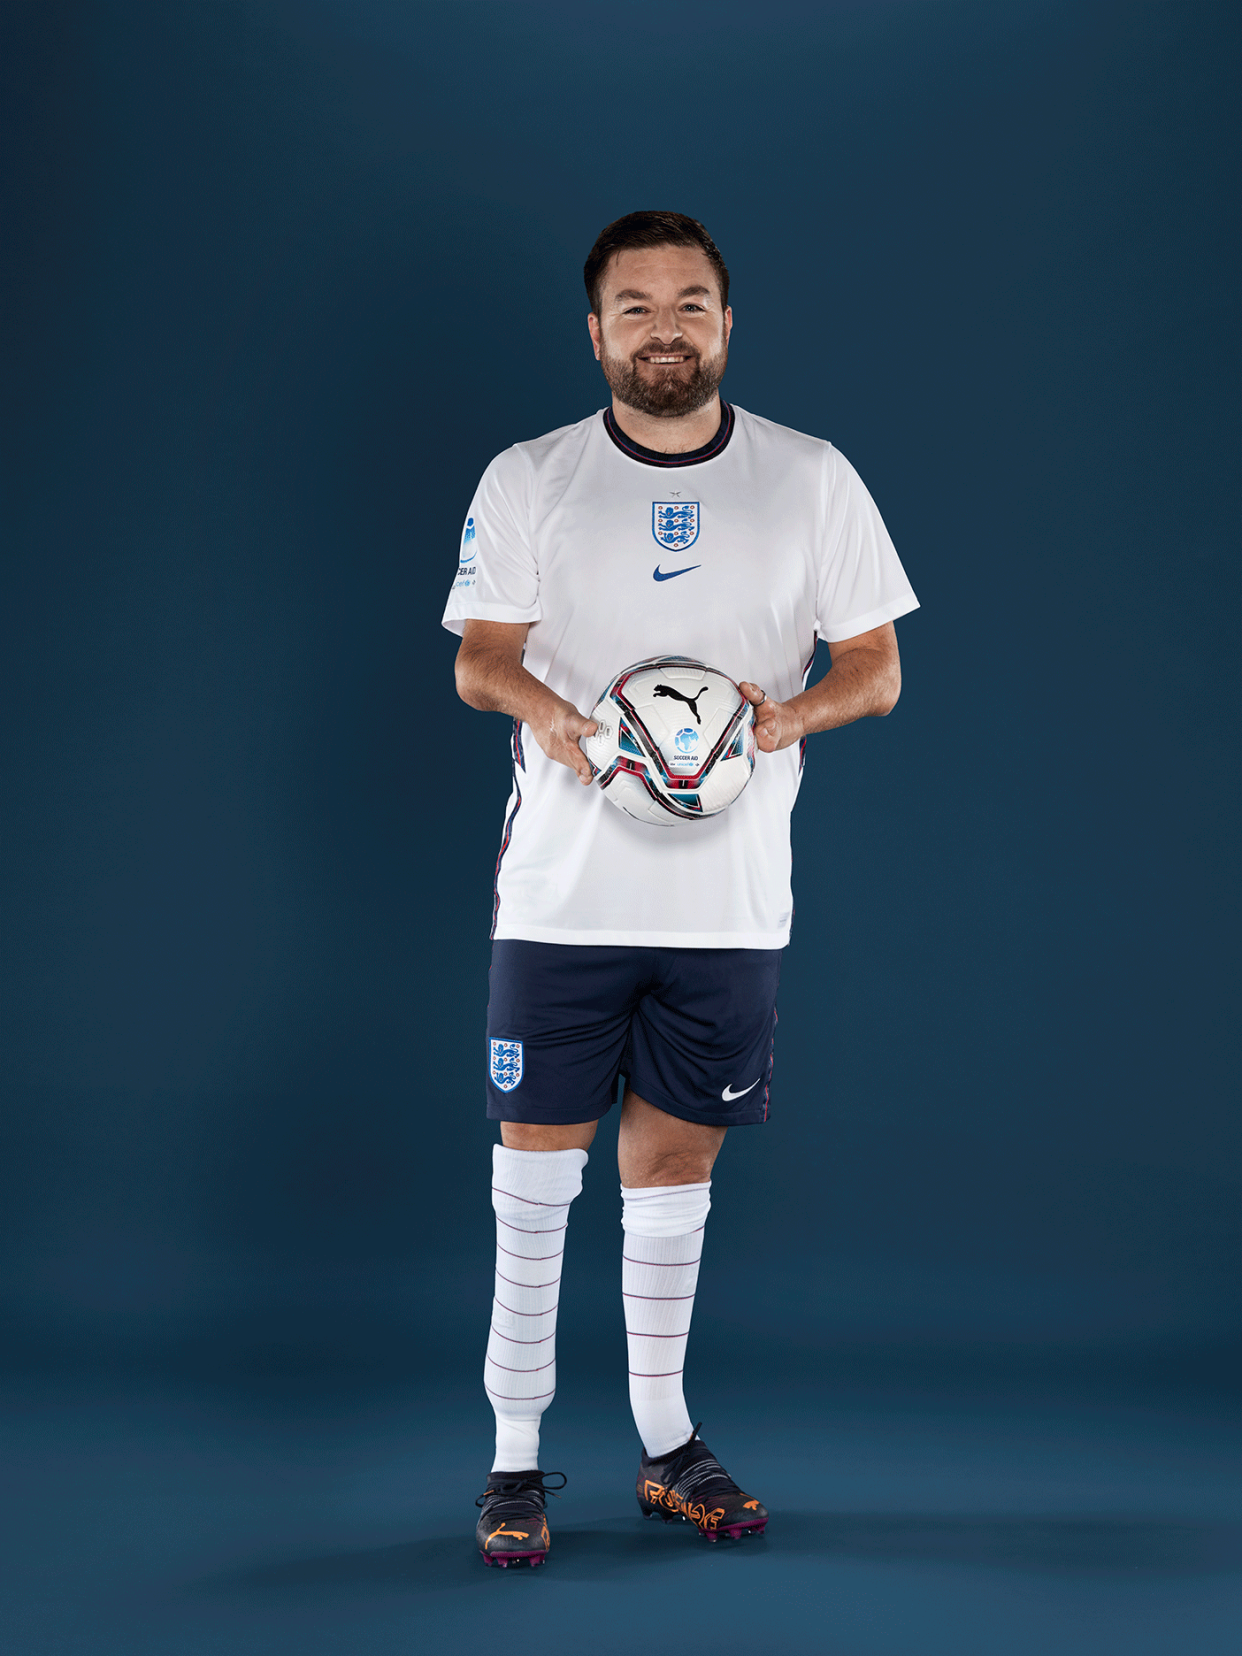 Alex Brooker impressed viewers as the first disabled player to take part in Soccer Aid. (ITV)